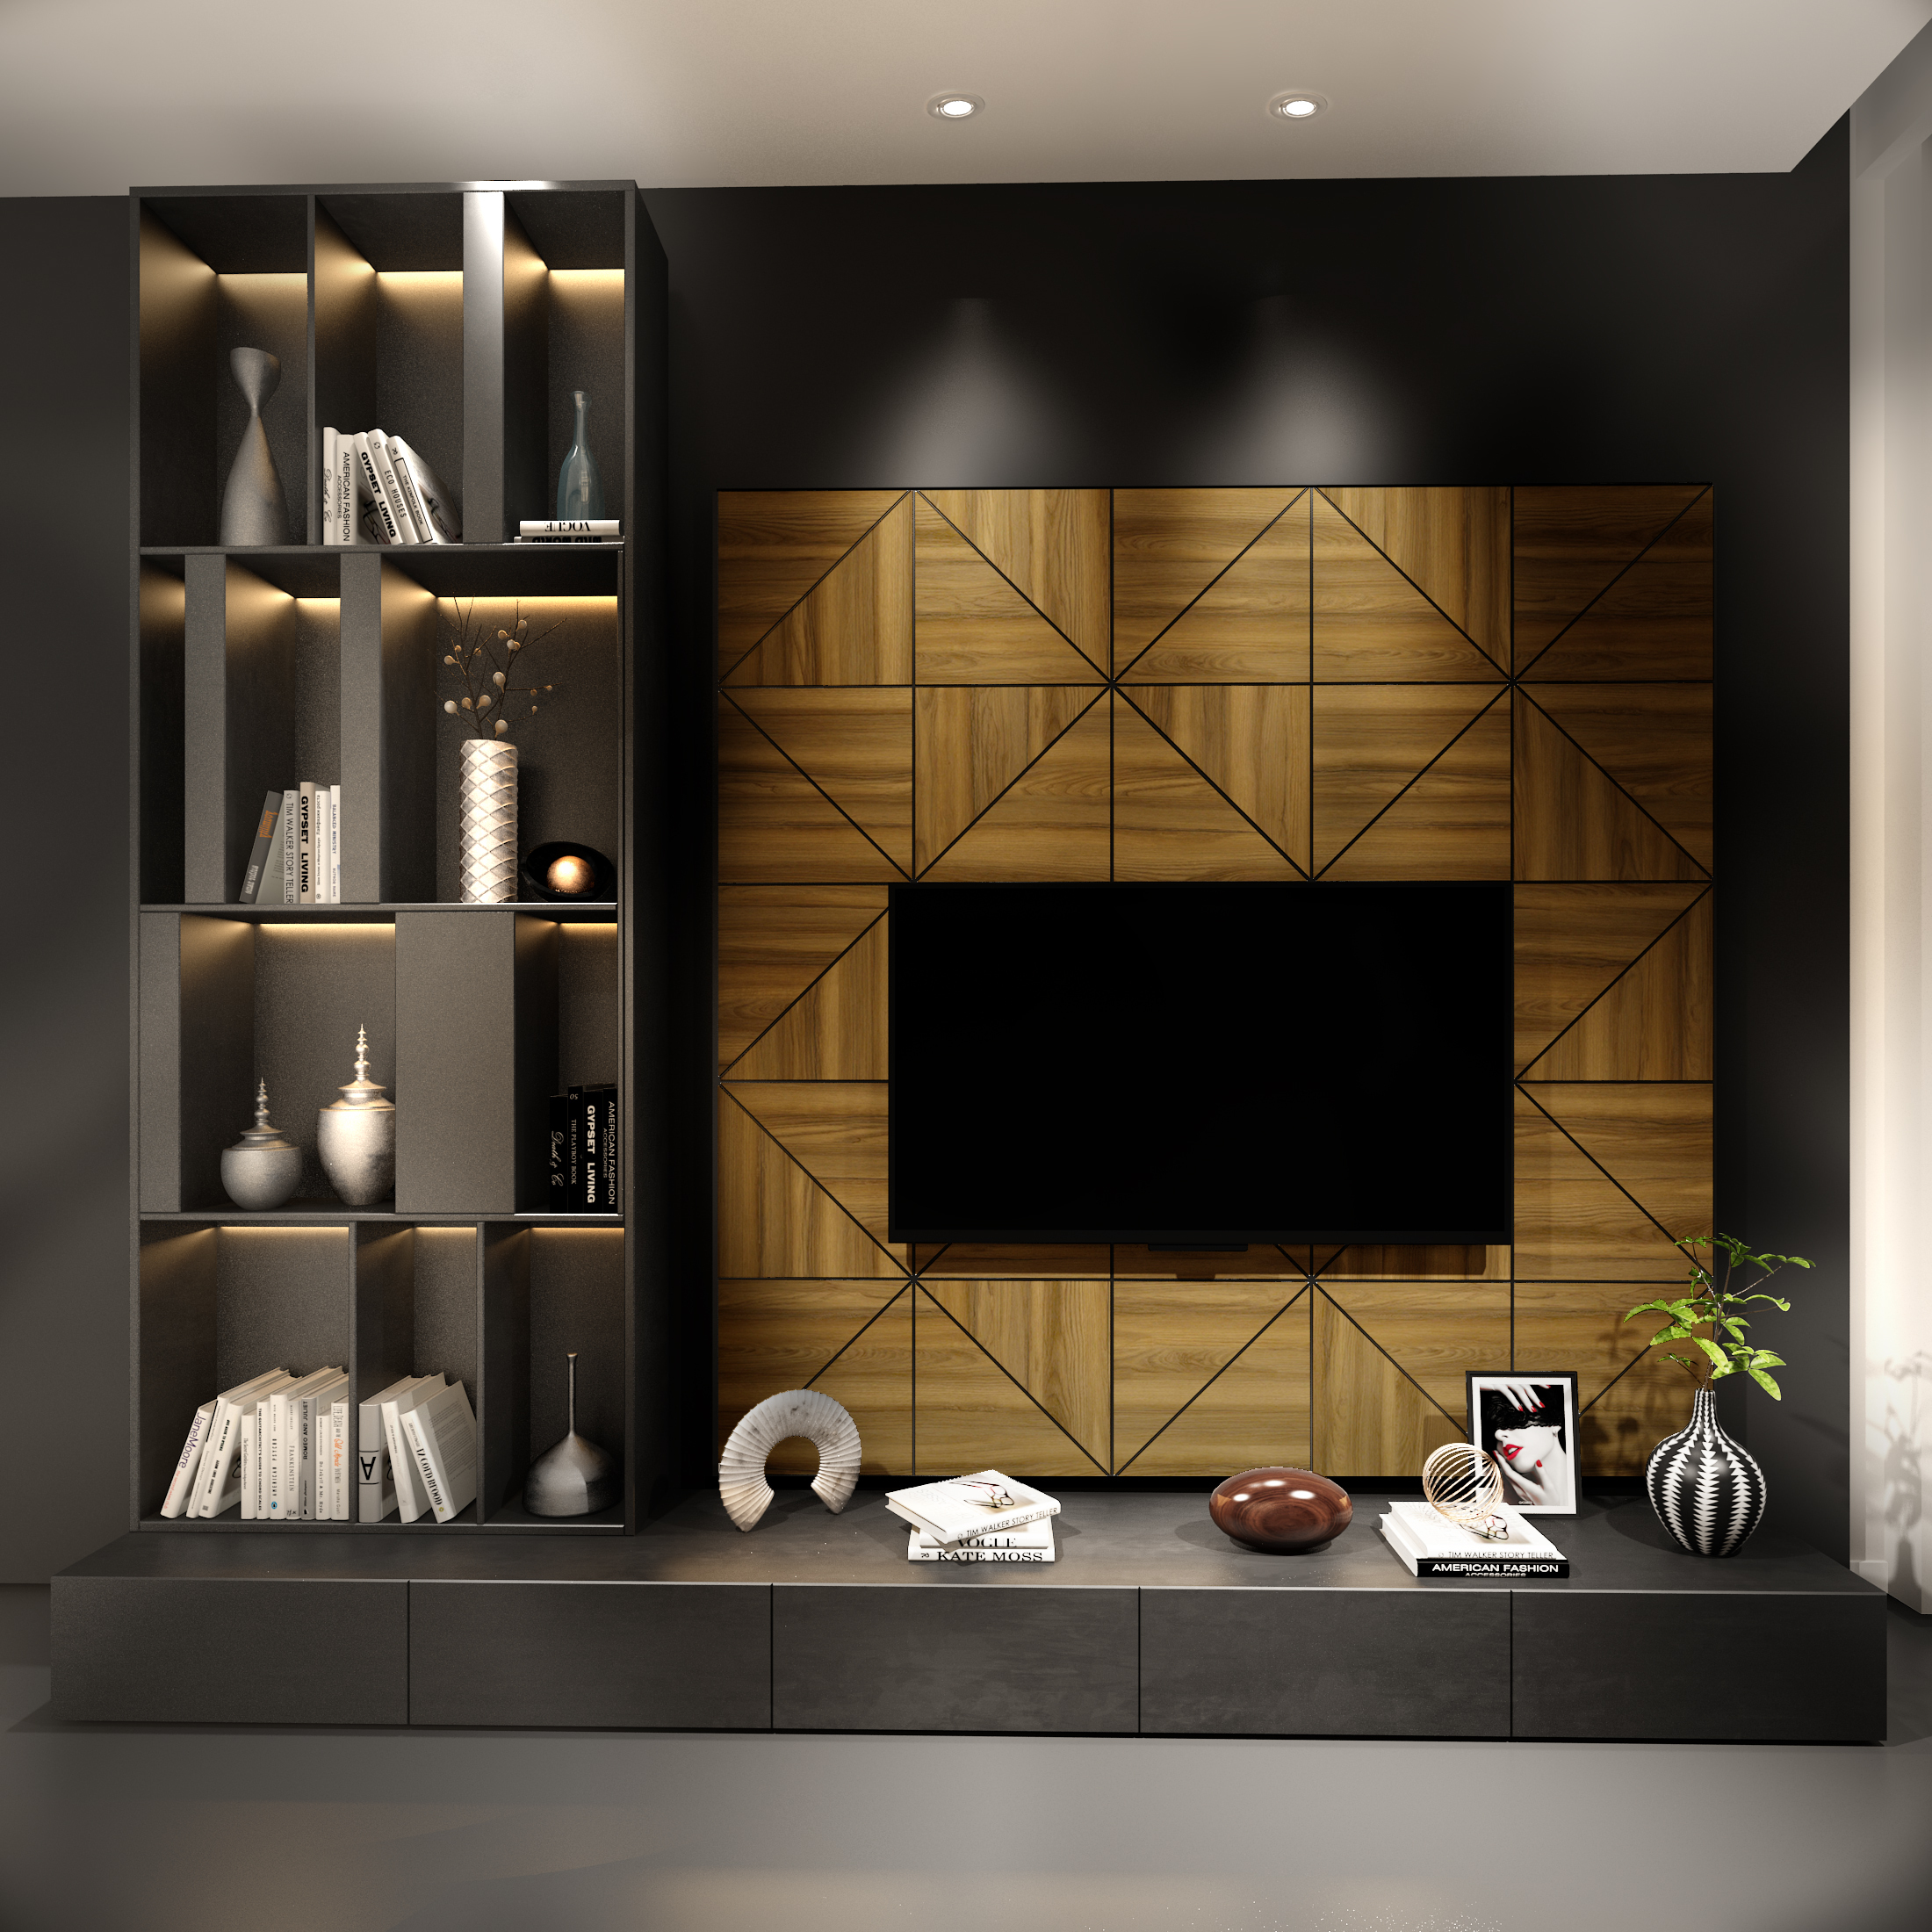 Art3d 3D Wall Panels Upgrade your Wall to Life - Great Modem 3D Wall Decor  